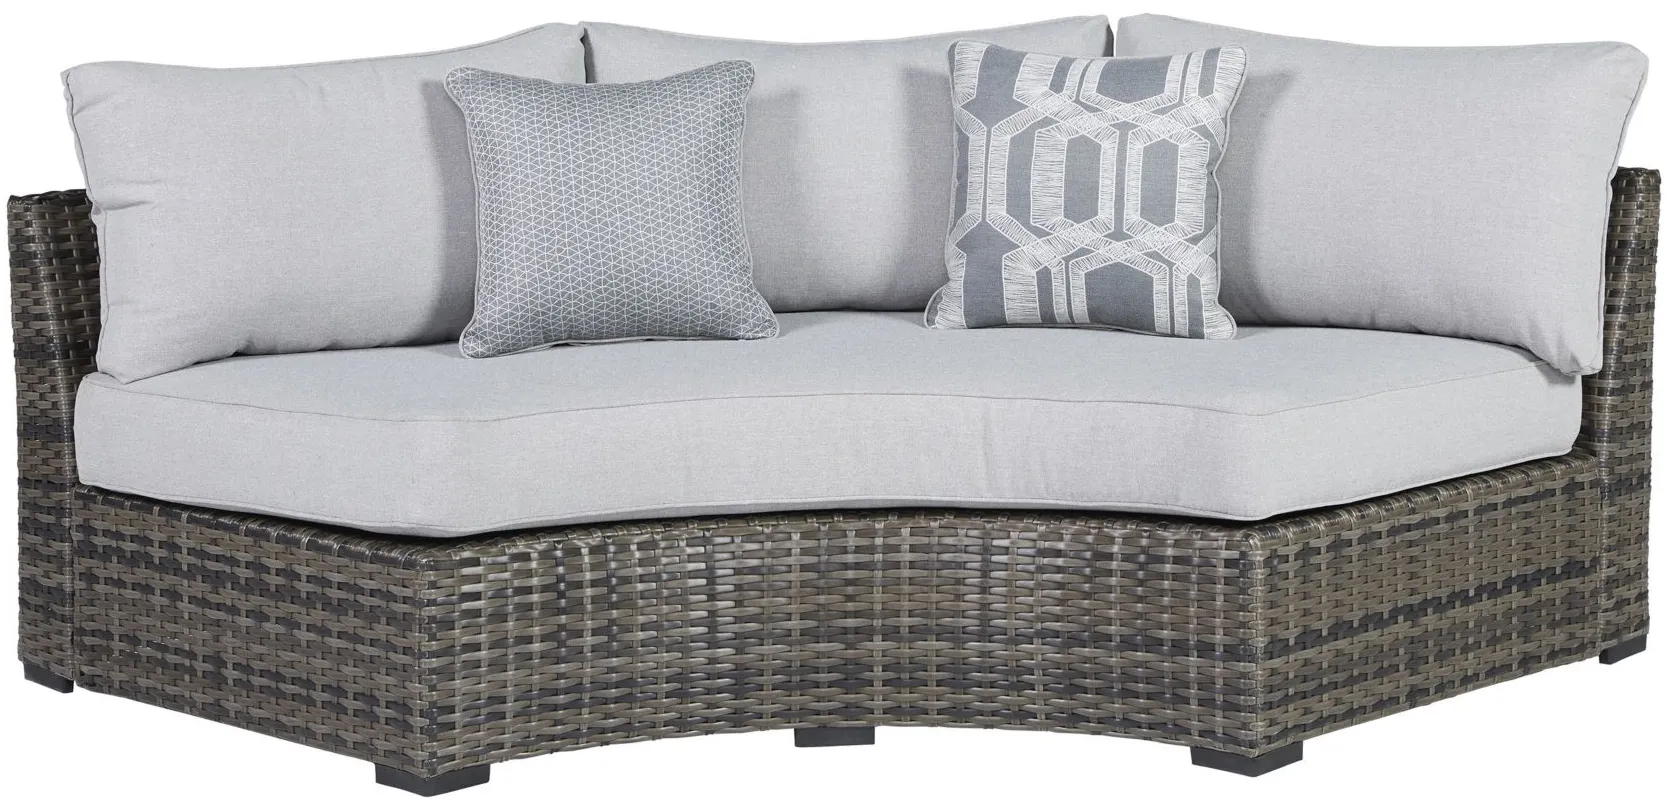 Harbor Court Curved Loveseat with Cushion in Gray by Ashley Furniture